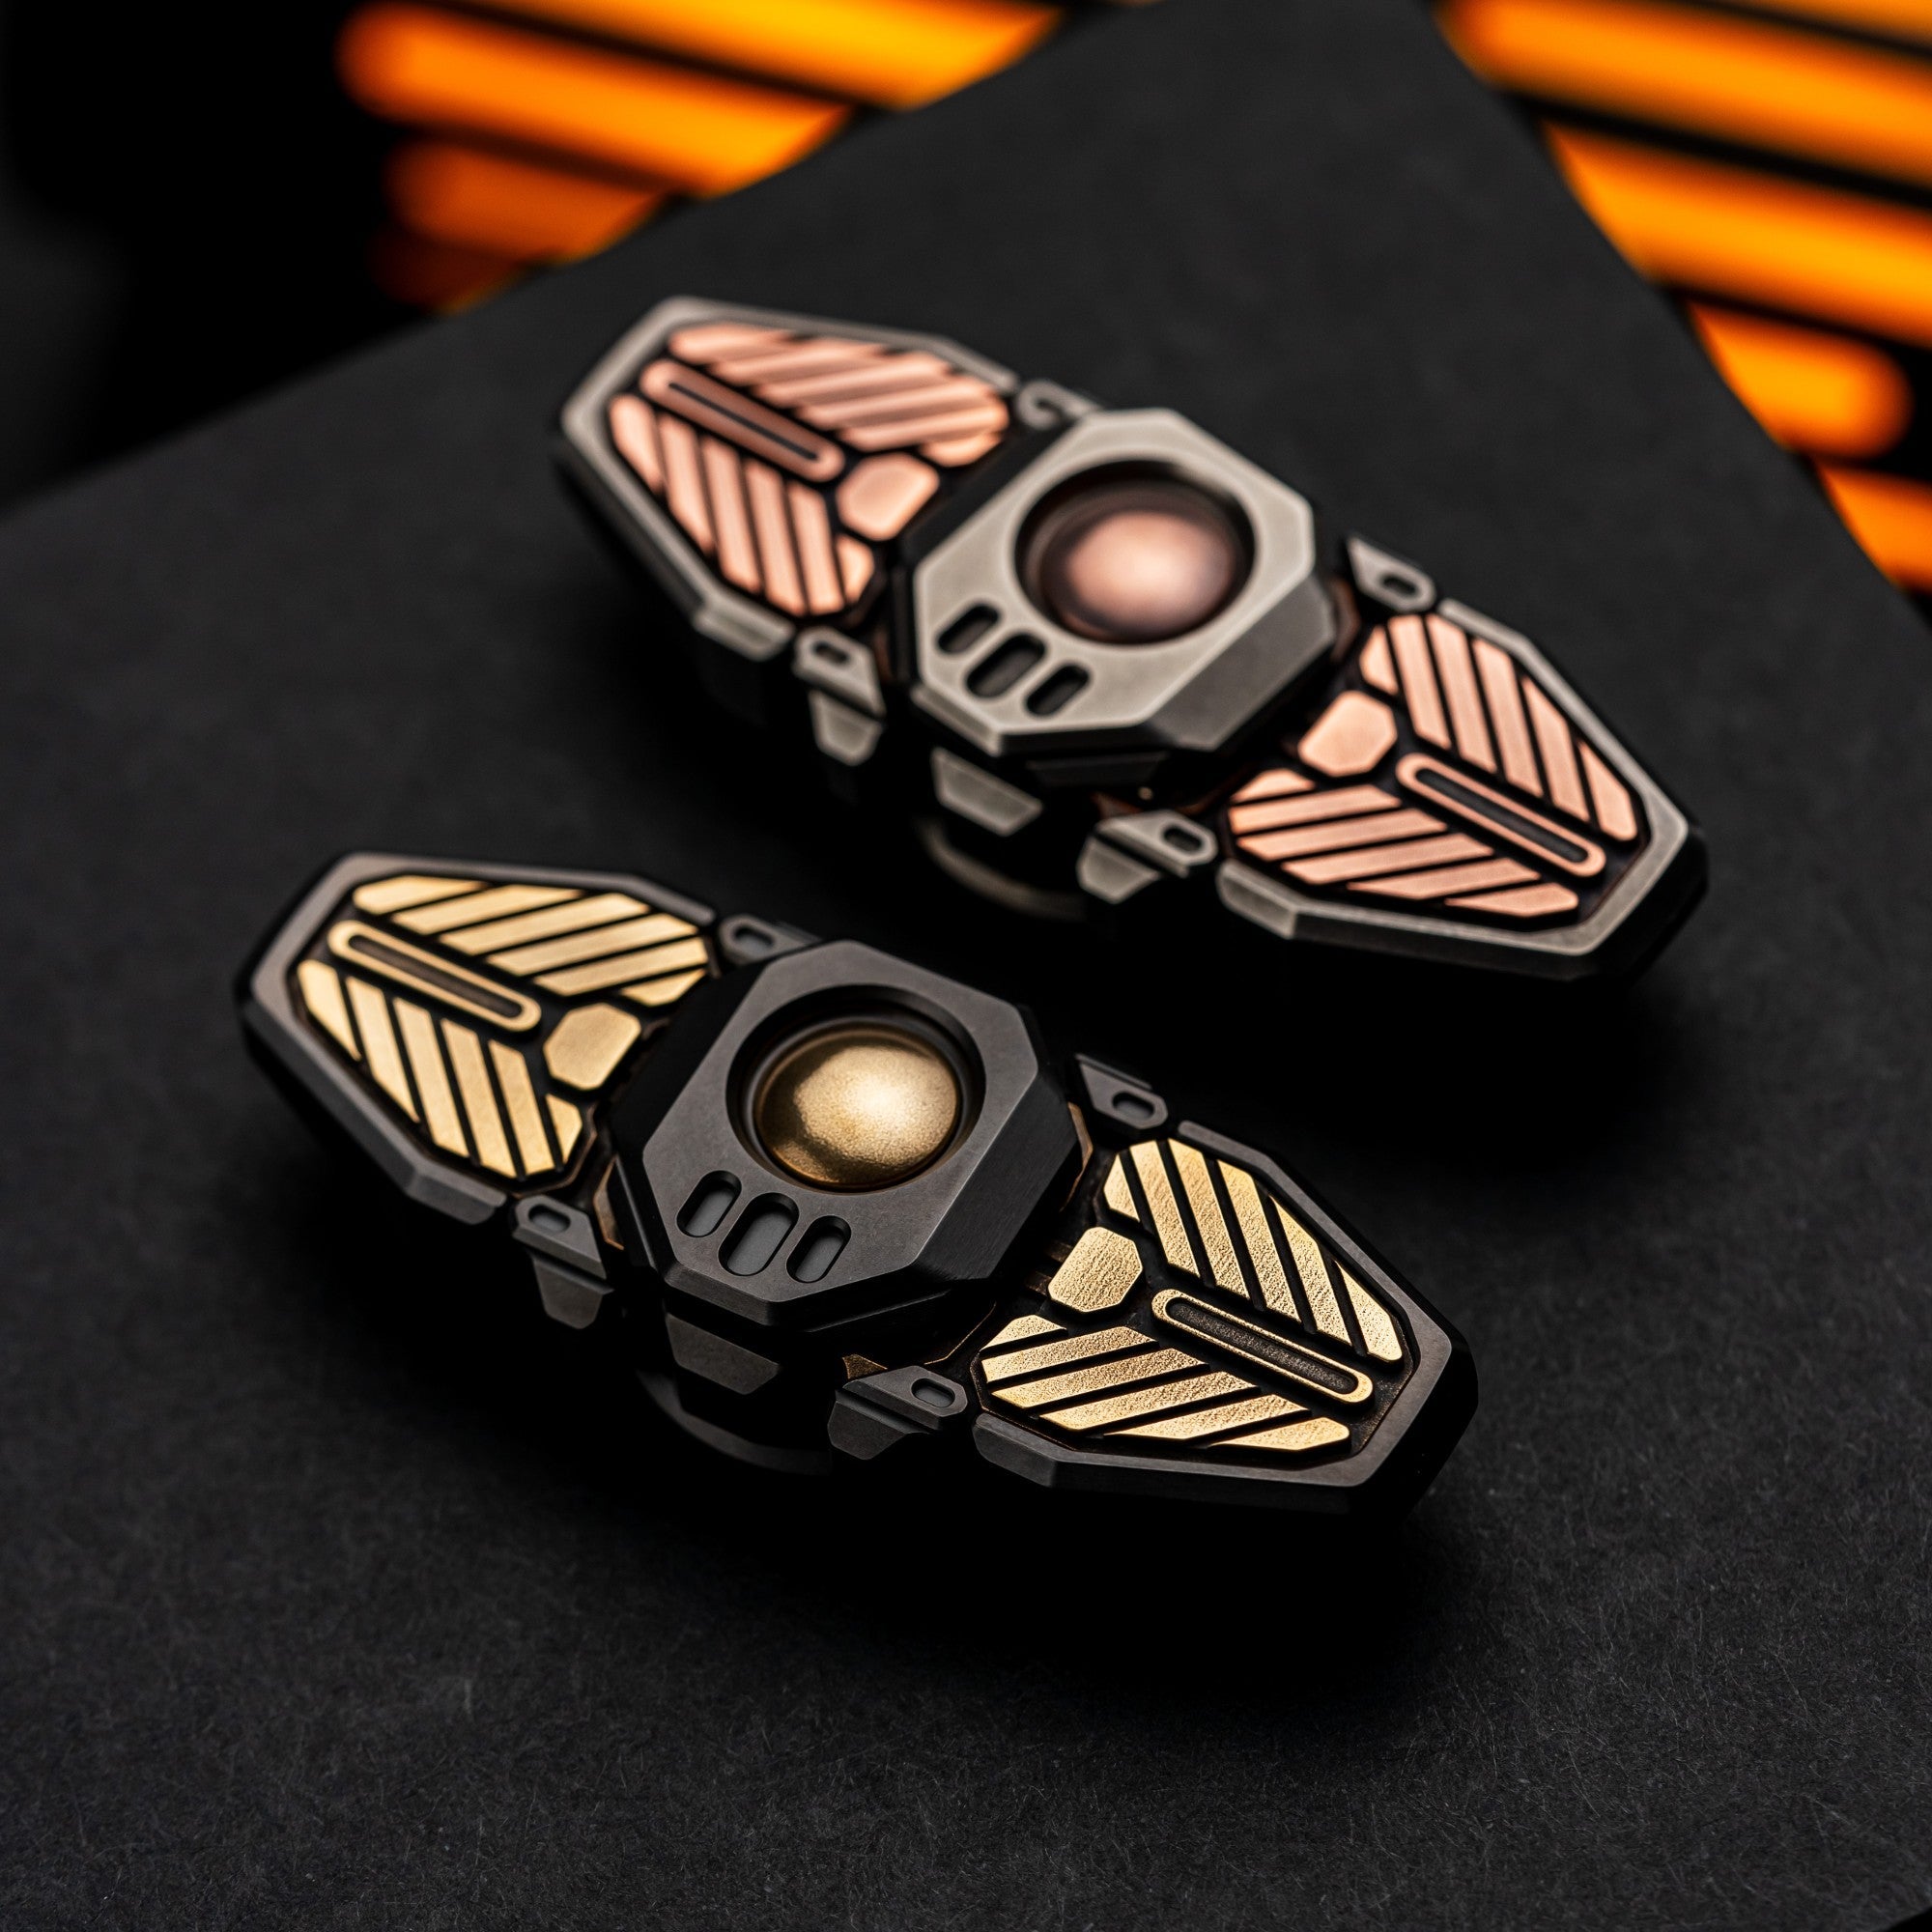 WANWU Courier Mini Robot Stretchable Fidget Spinner - MetaEDC